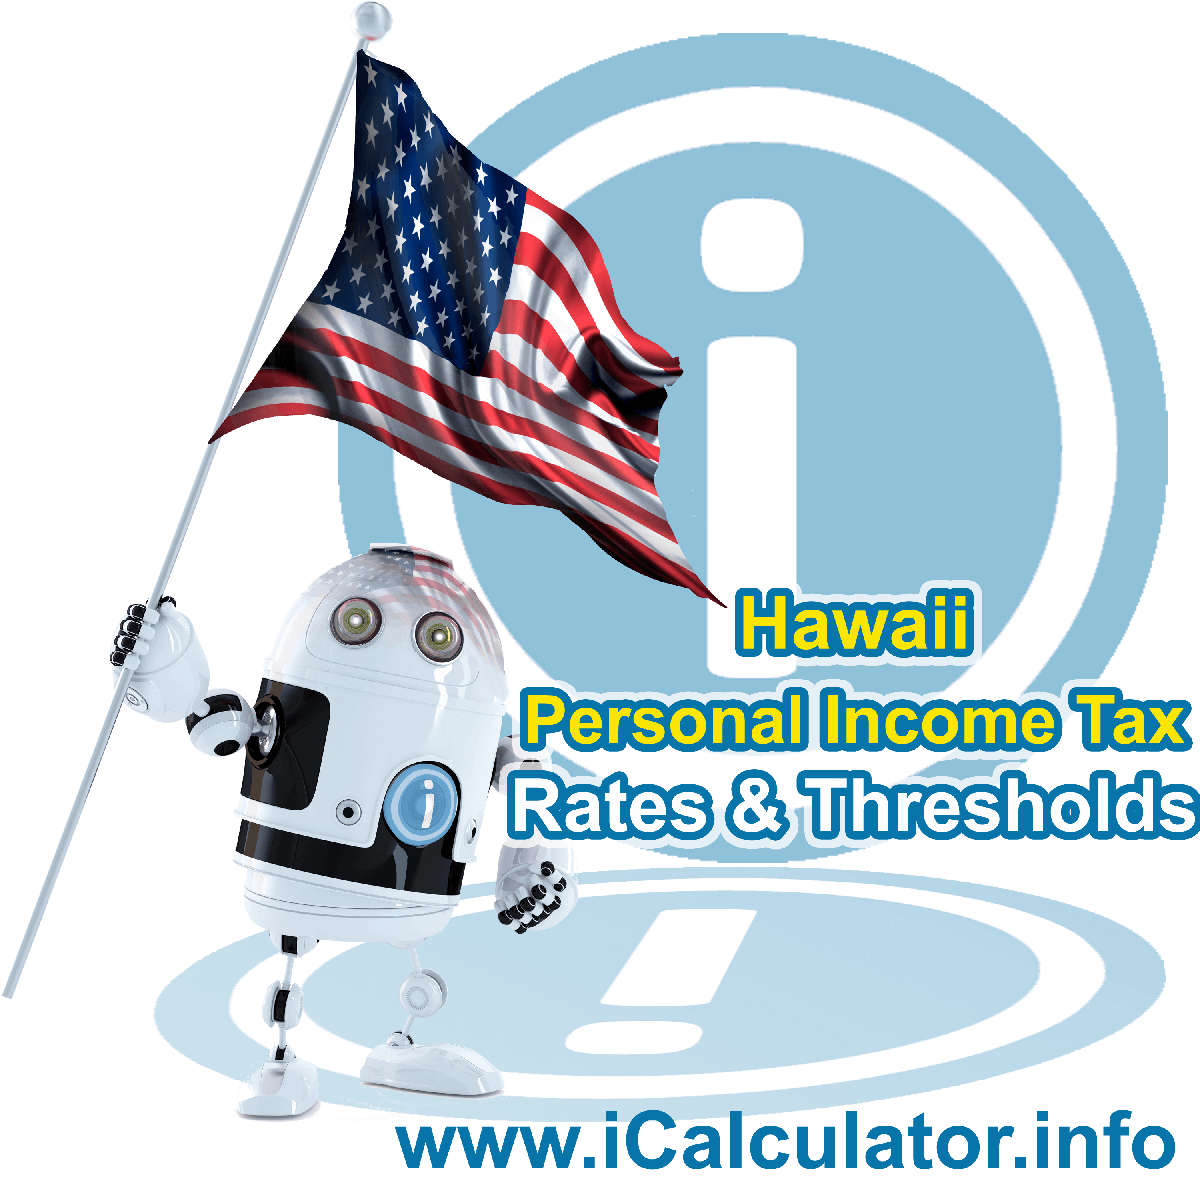 Hawaii State Tax Tables 2023. This image displays details of the Hawaii State Tax Tables for the 2023 tax return year which is provided in support of the 2023 US Tax Calculator